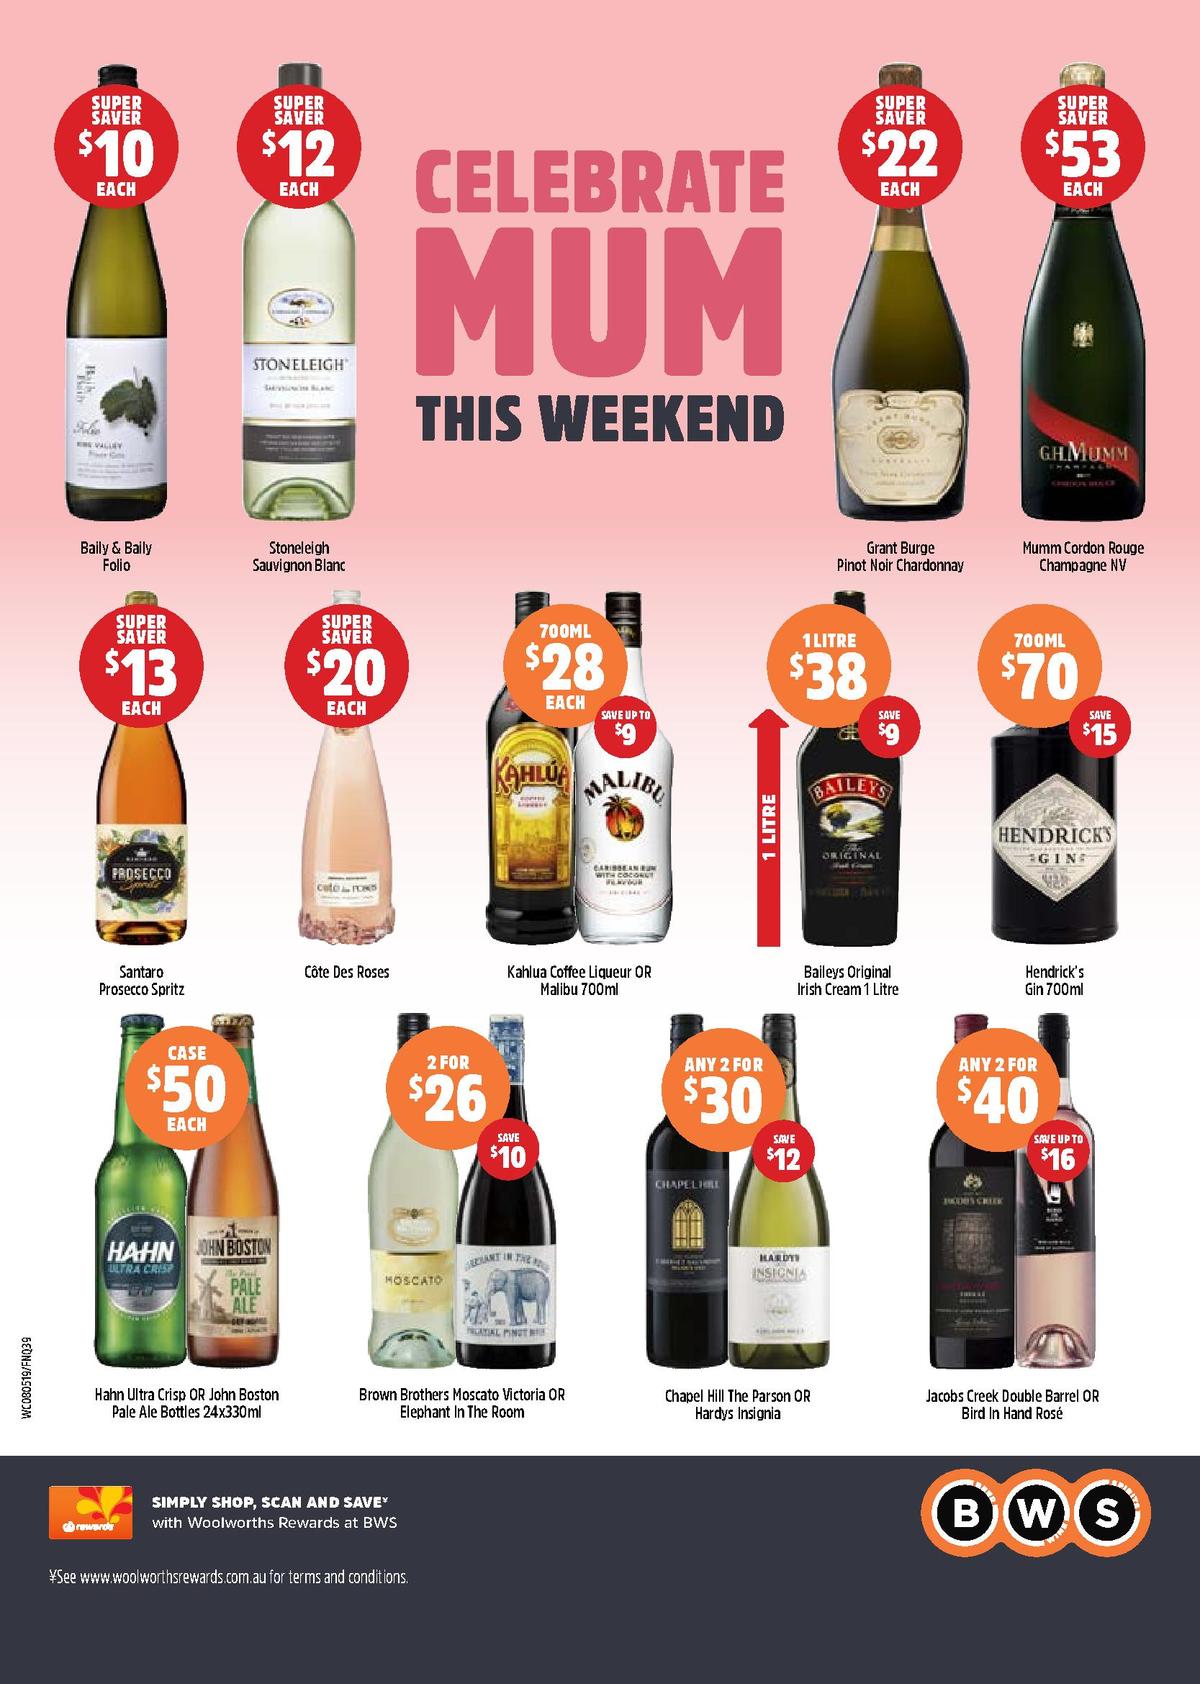 Woolworths Catalogues from 8 May